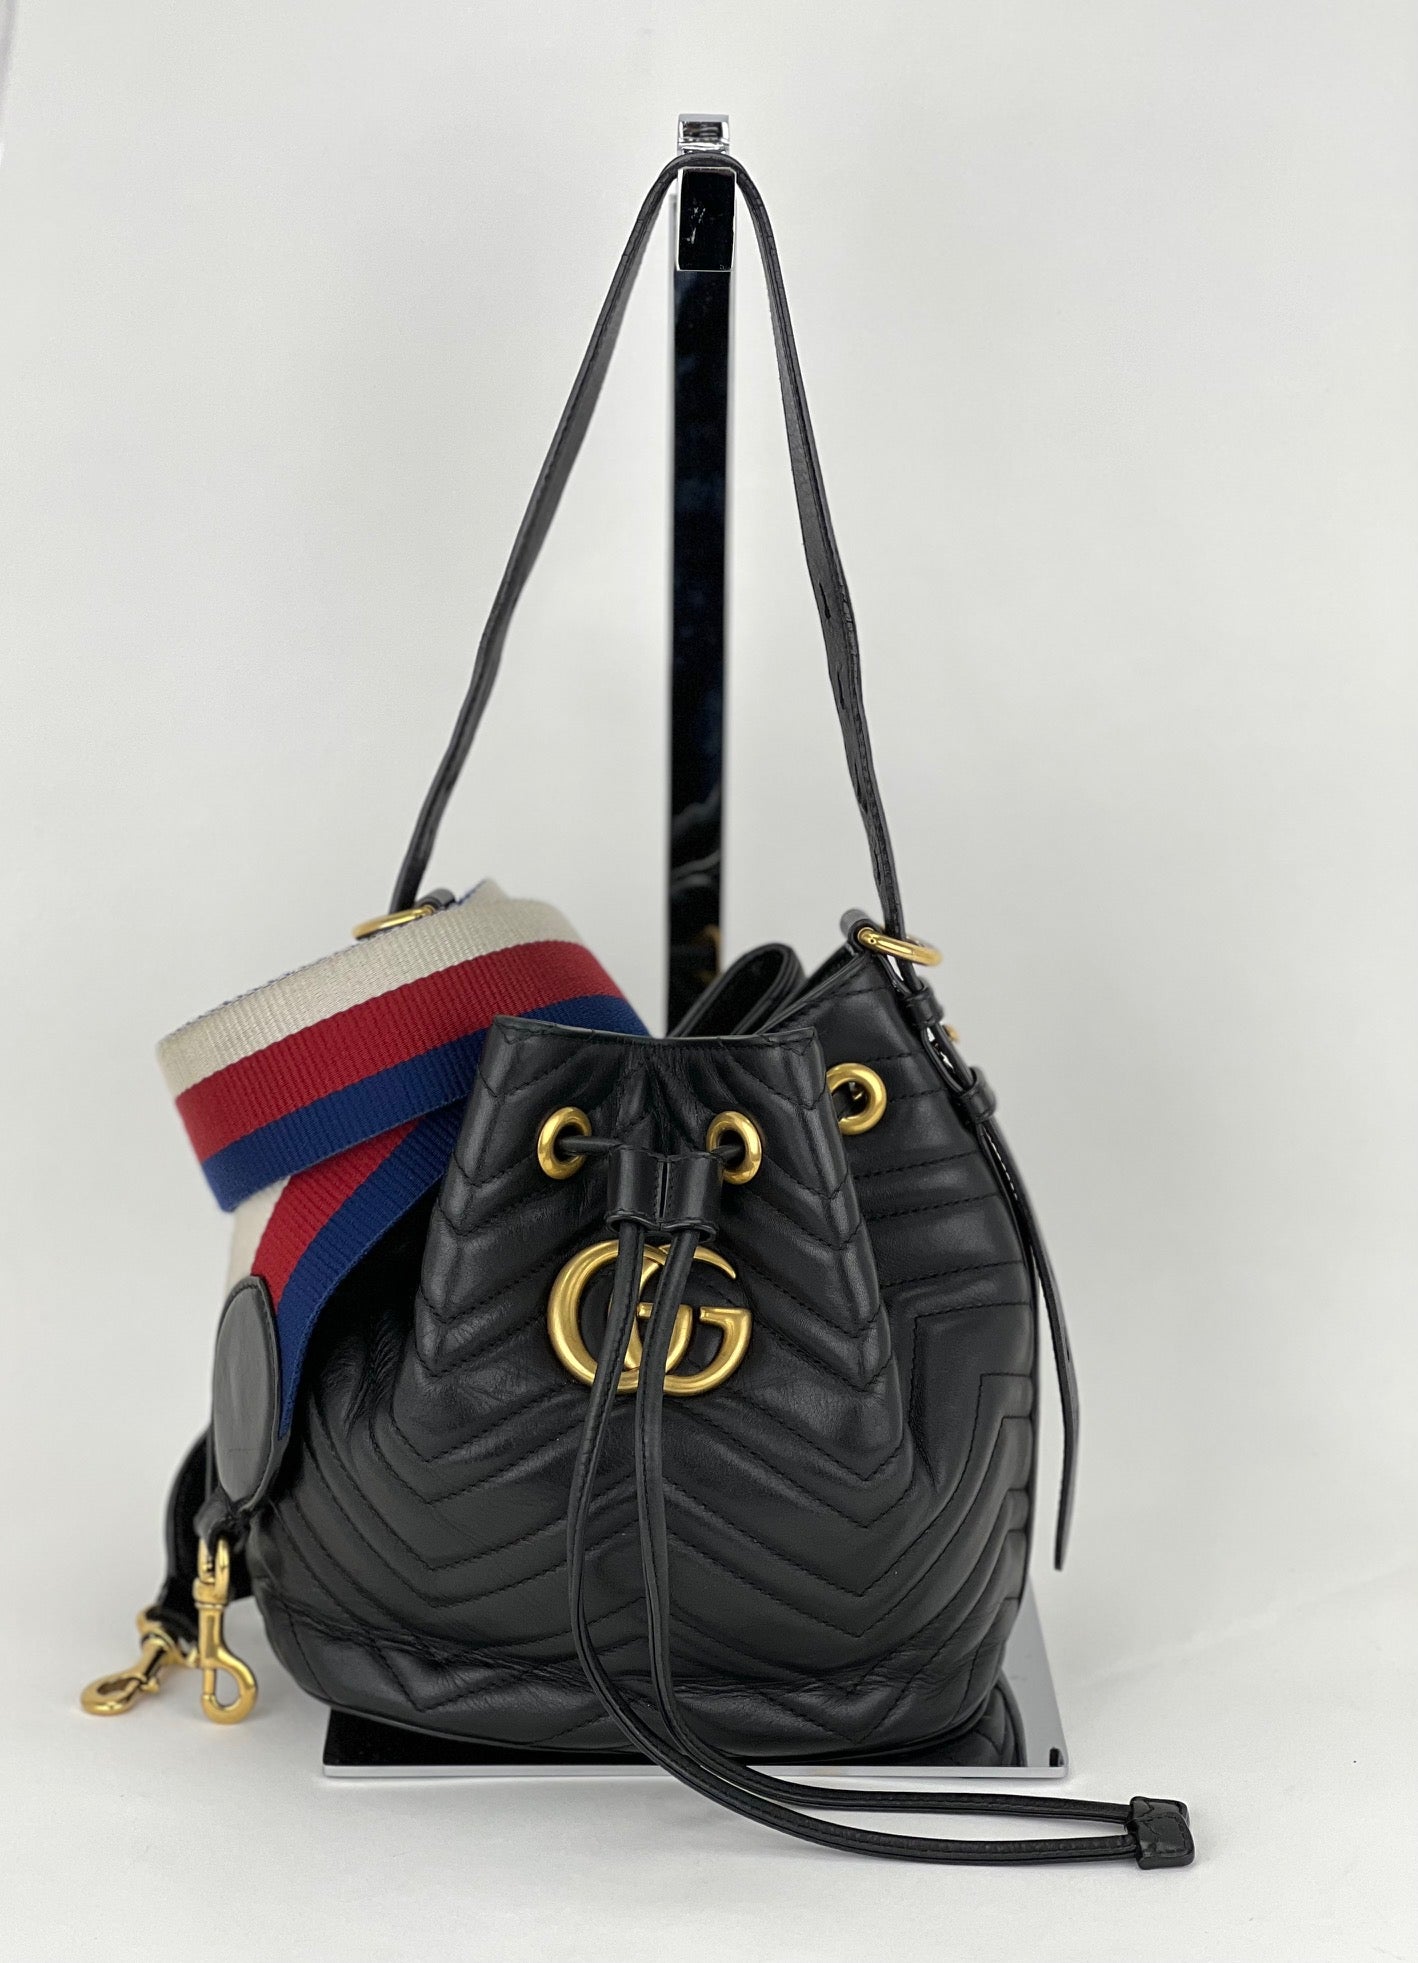 Photos Submitted by Mautto Customers in 2023  Adjustable strap bag, Gucci  vintage bag, Louis vuitton bucket bag